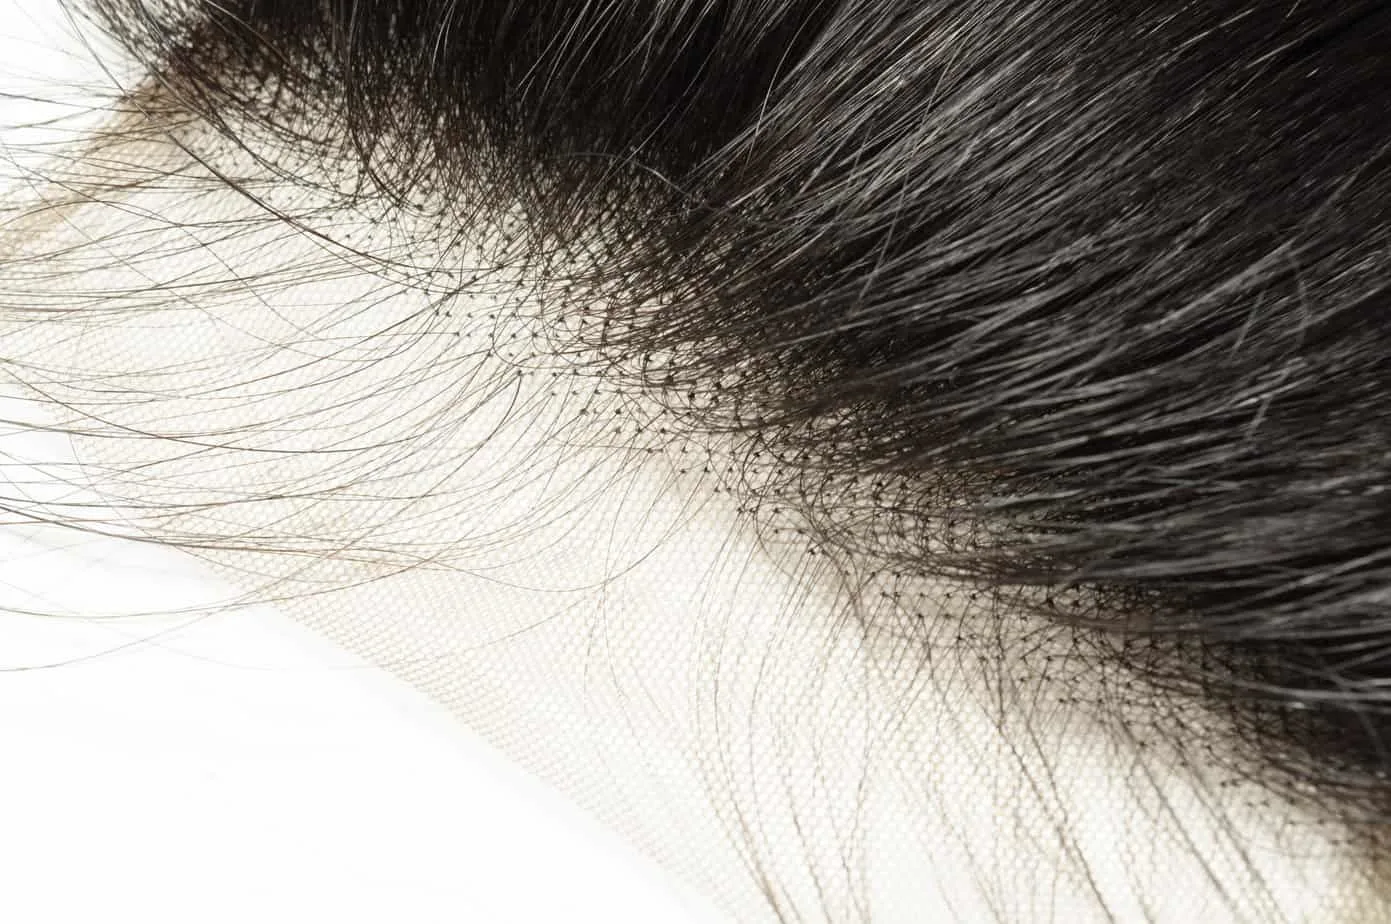 Close-up showing synthetic hair lace. Human hair counterparts look similar but have higher durability.